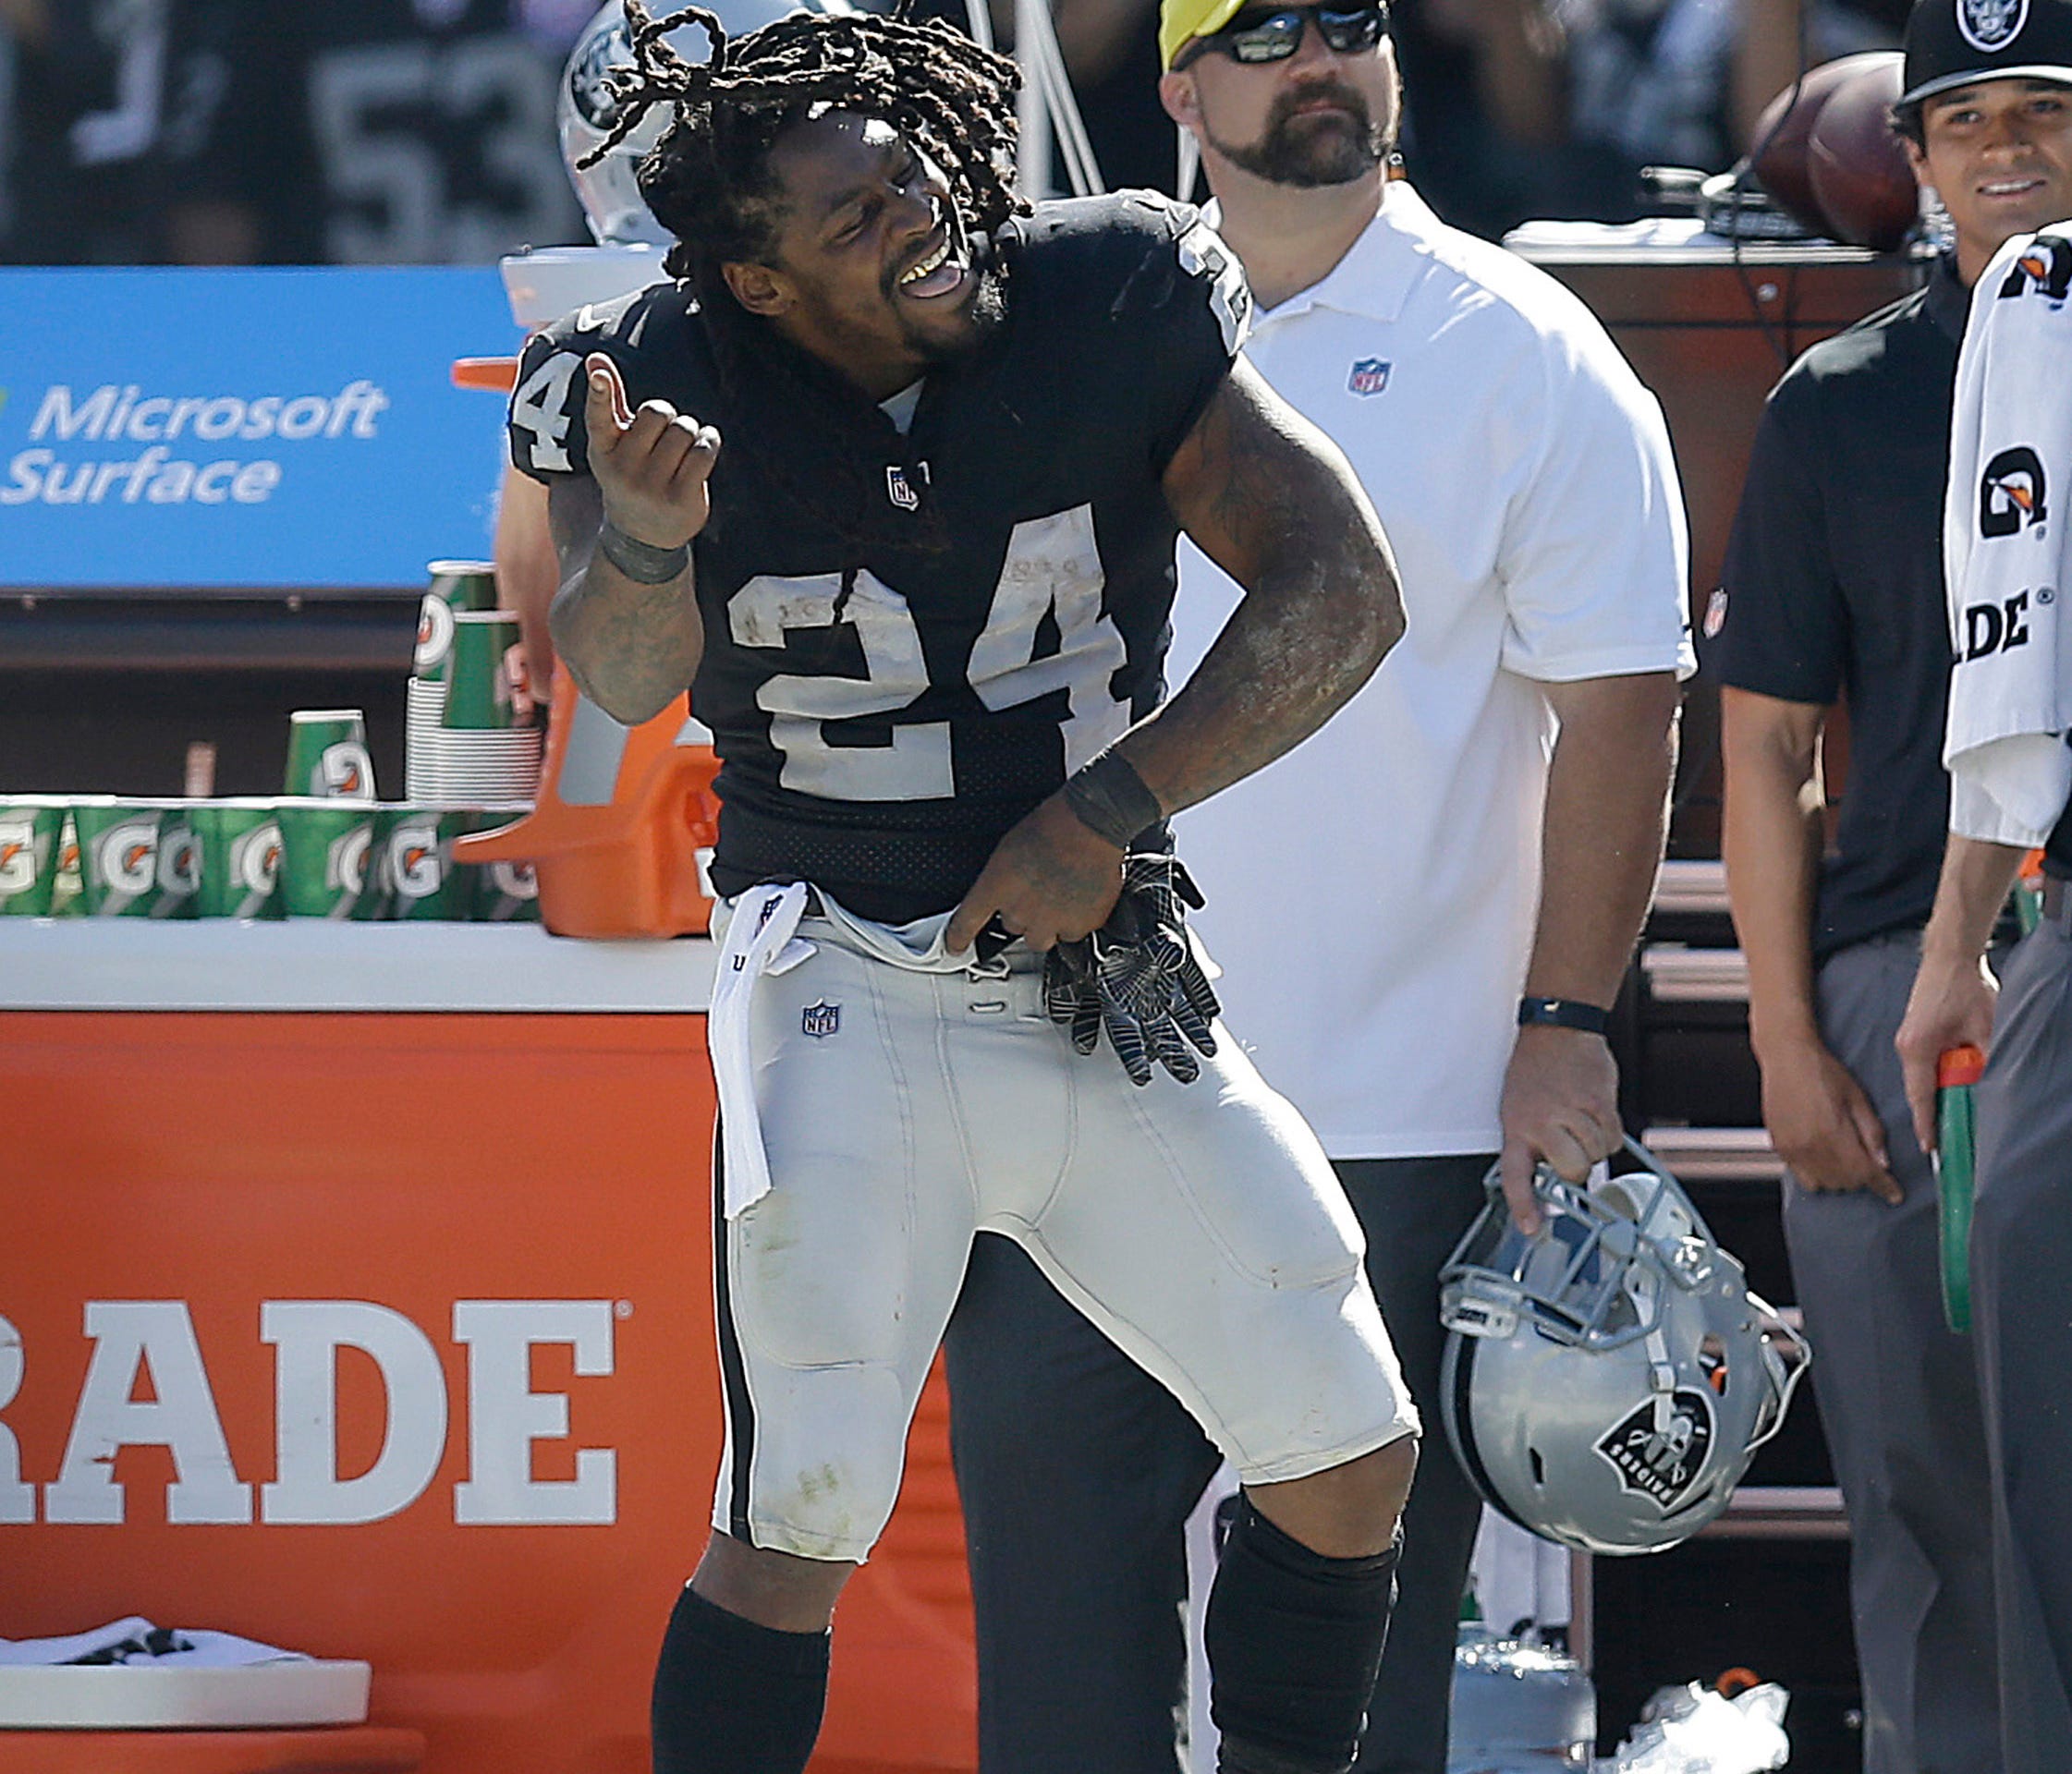 Oakland Raiders running back Marshawn Lynch (24) dances on the sideline during the second half of an NFL football game against the New York Jets in Oakland, Calif., Sunday, Sept. 17, 2017. (AP Photo/Ben Margot)